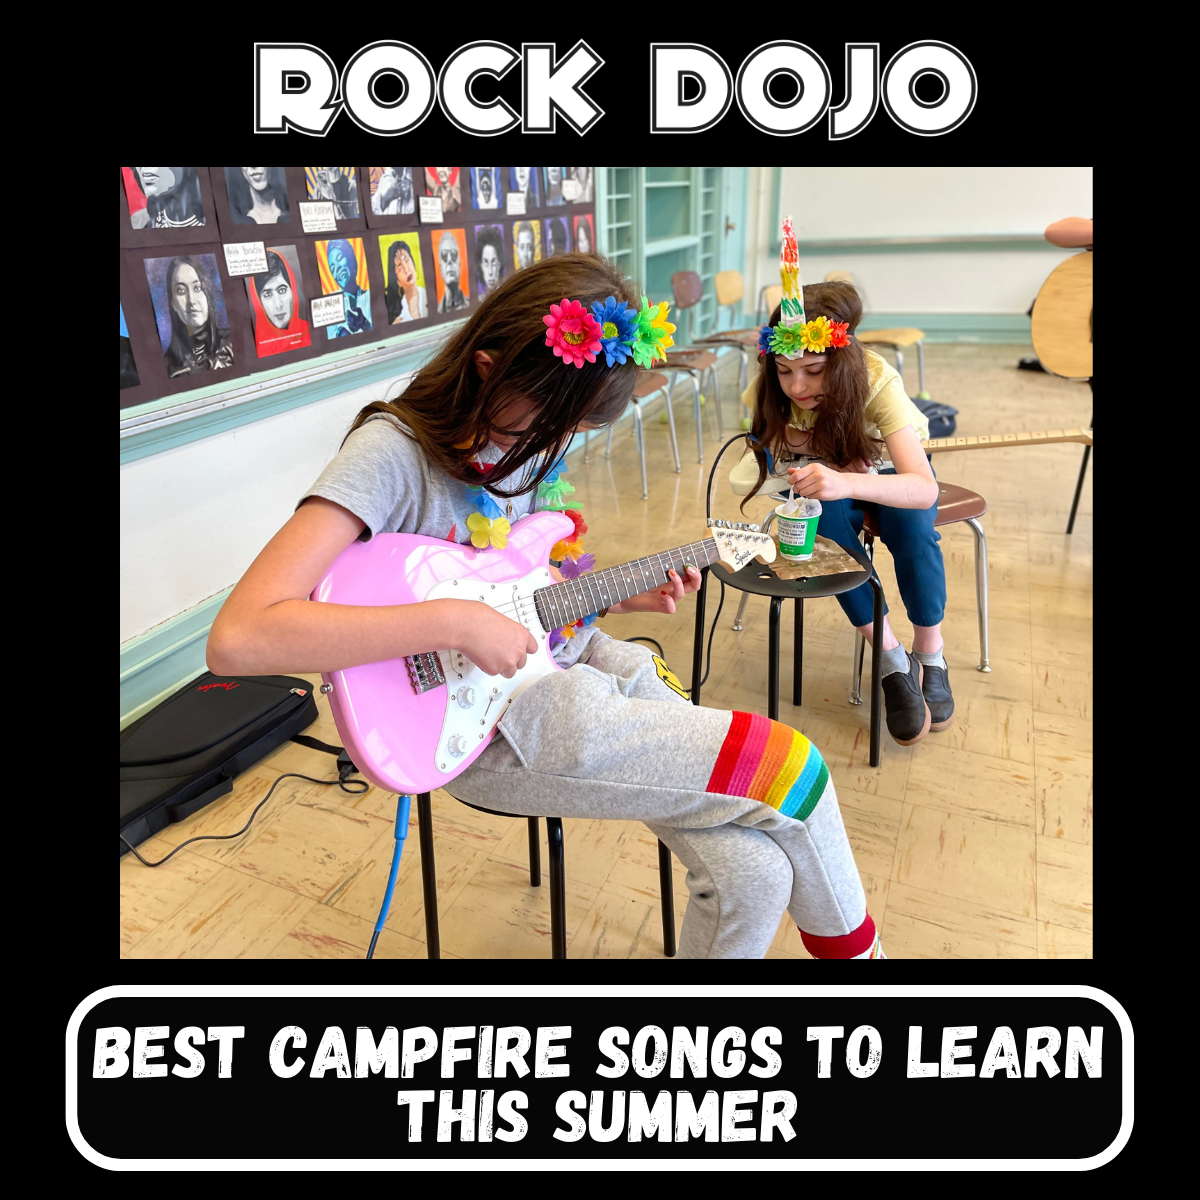 The image describes a middle school child wearing a flower crown and playing a pink electric guitar after-school